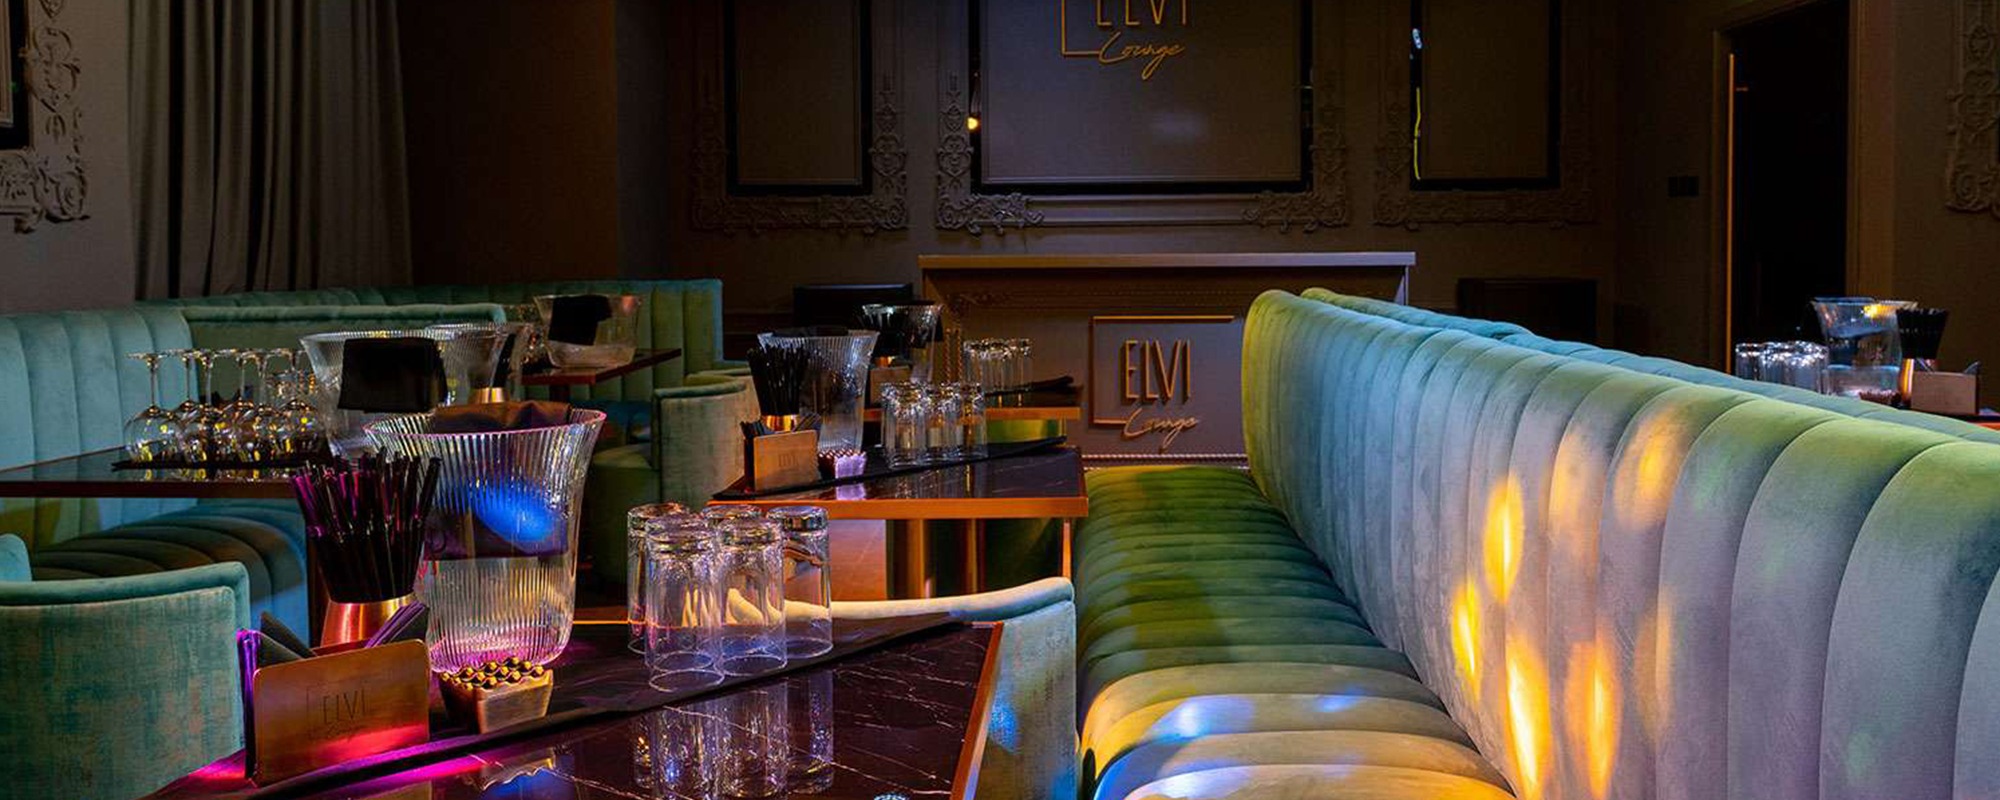 Elvi Lounge - List of venues and places in Dubai